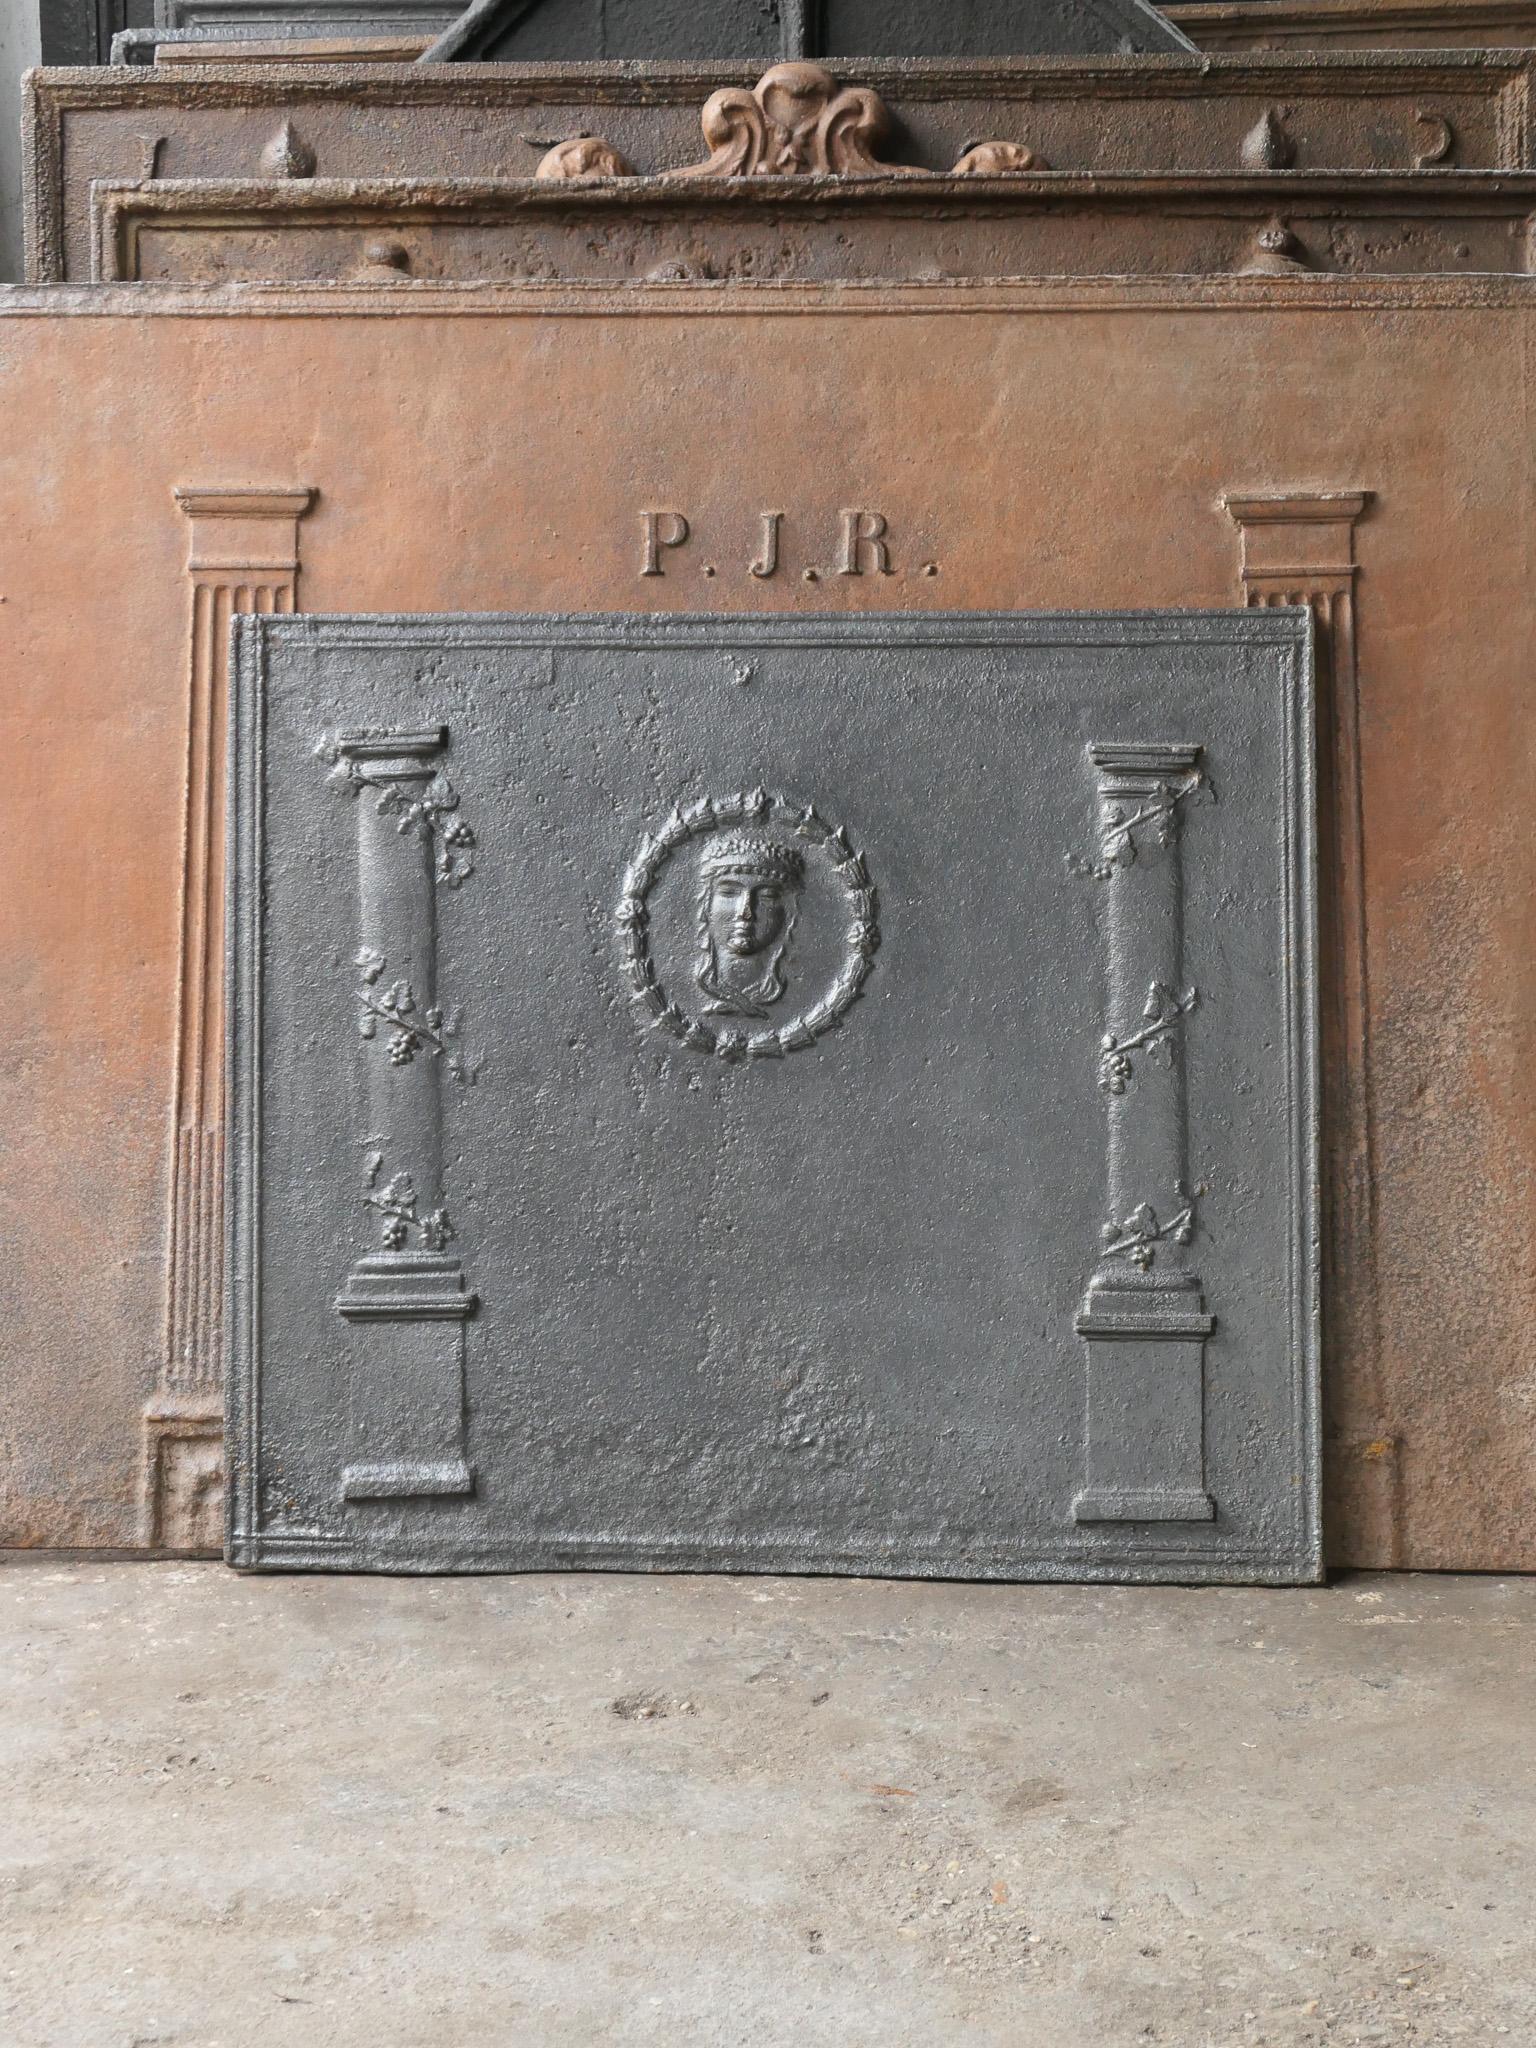 18th - 19th century French neoclassical fireback with two pillars surrounded by wine tendrils. The 'pillars of freedom' symbolize the value liberty, one of the three values of the French revolution. In the center is a decoration of a face of unknown